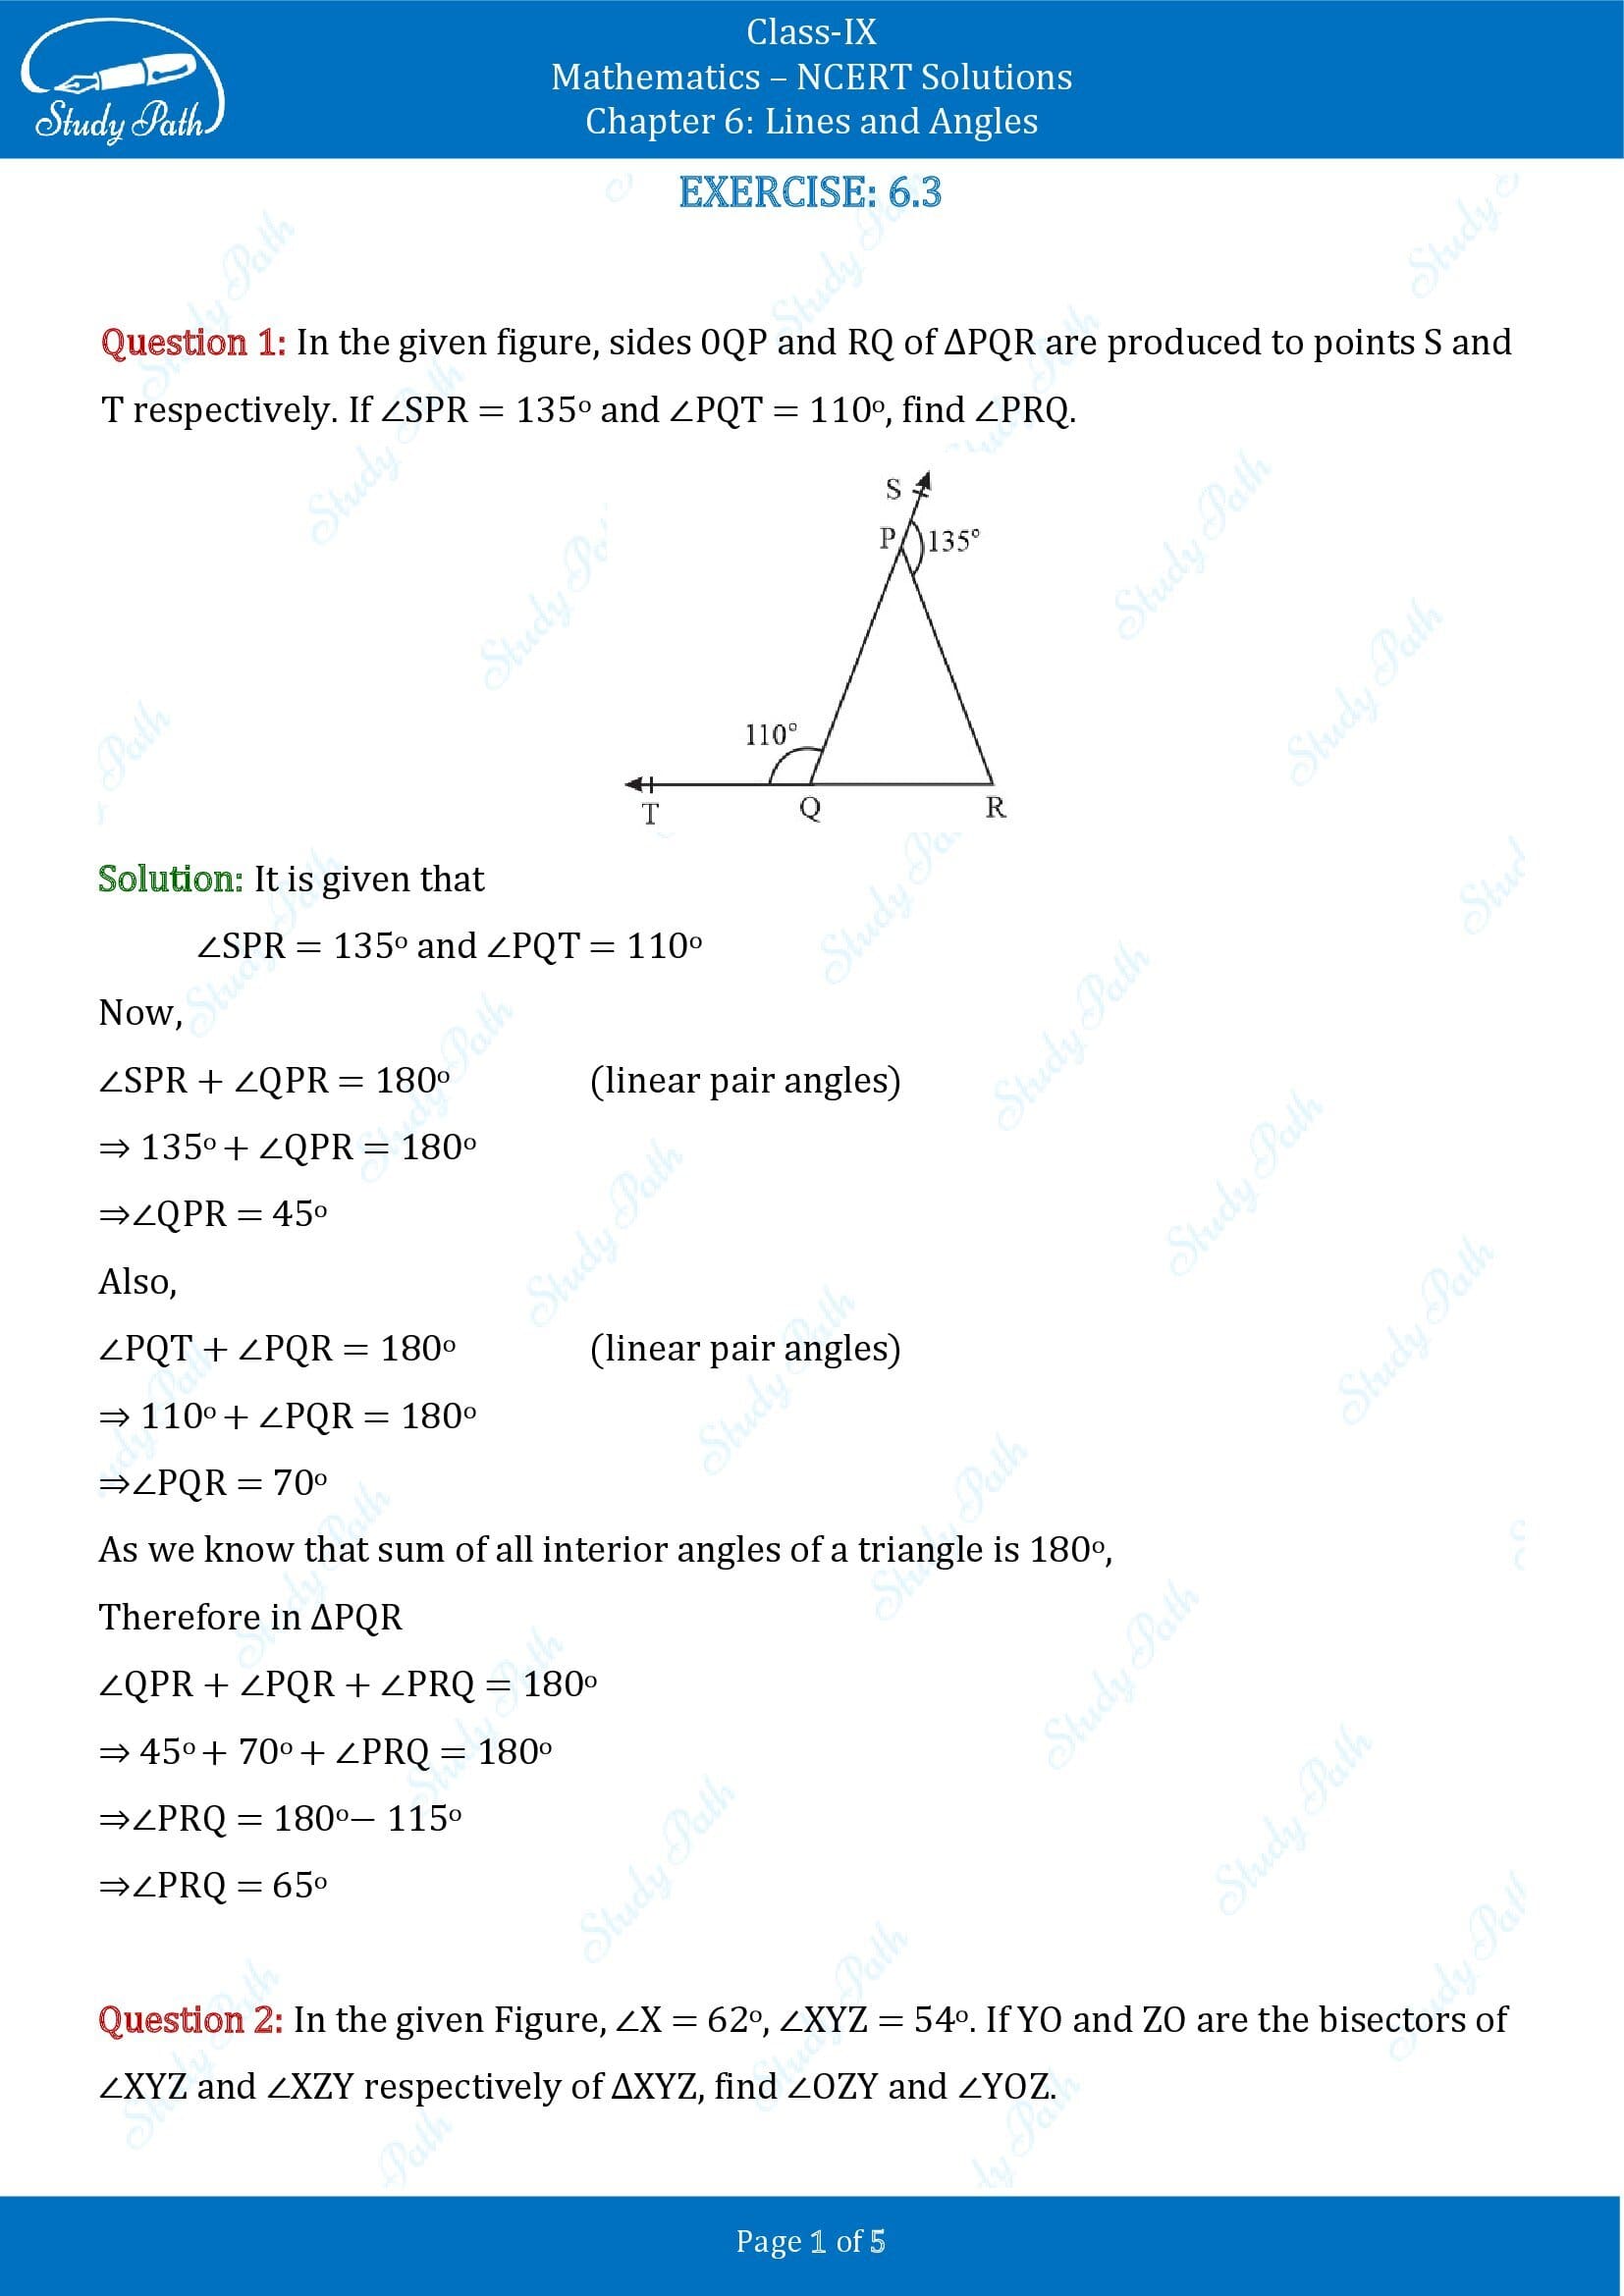 NCERT Solutions for Class 9 Maths Chapter 6 Lines and Angles Exercise 6.3 00001